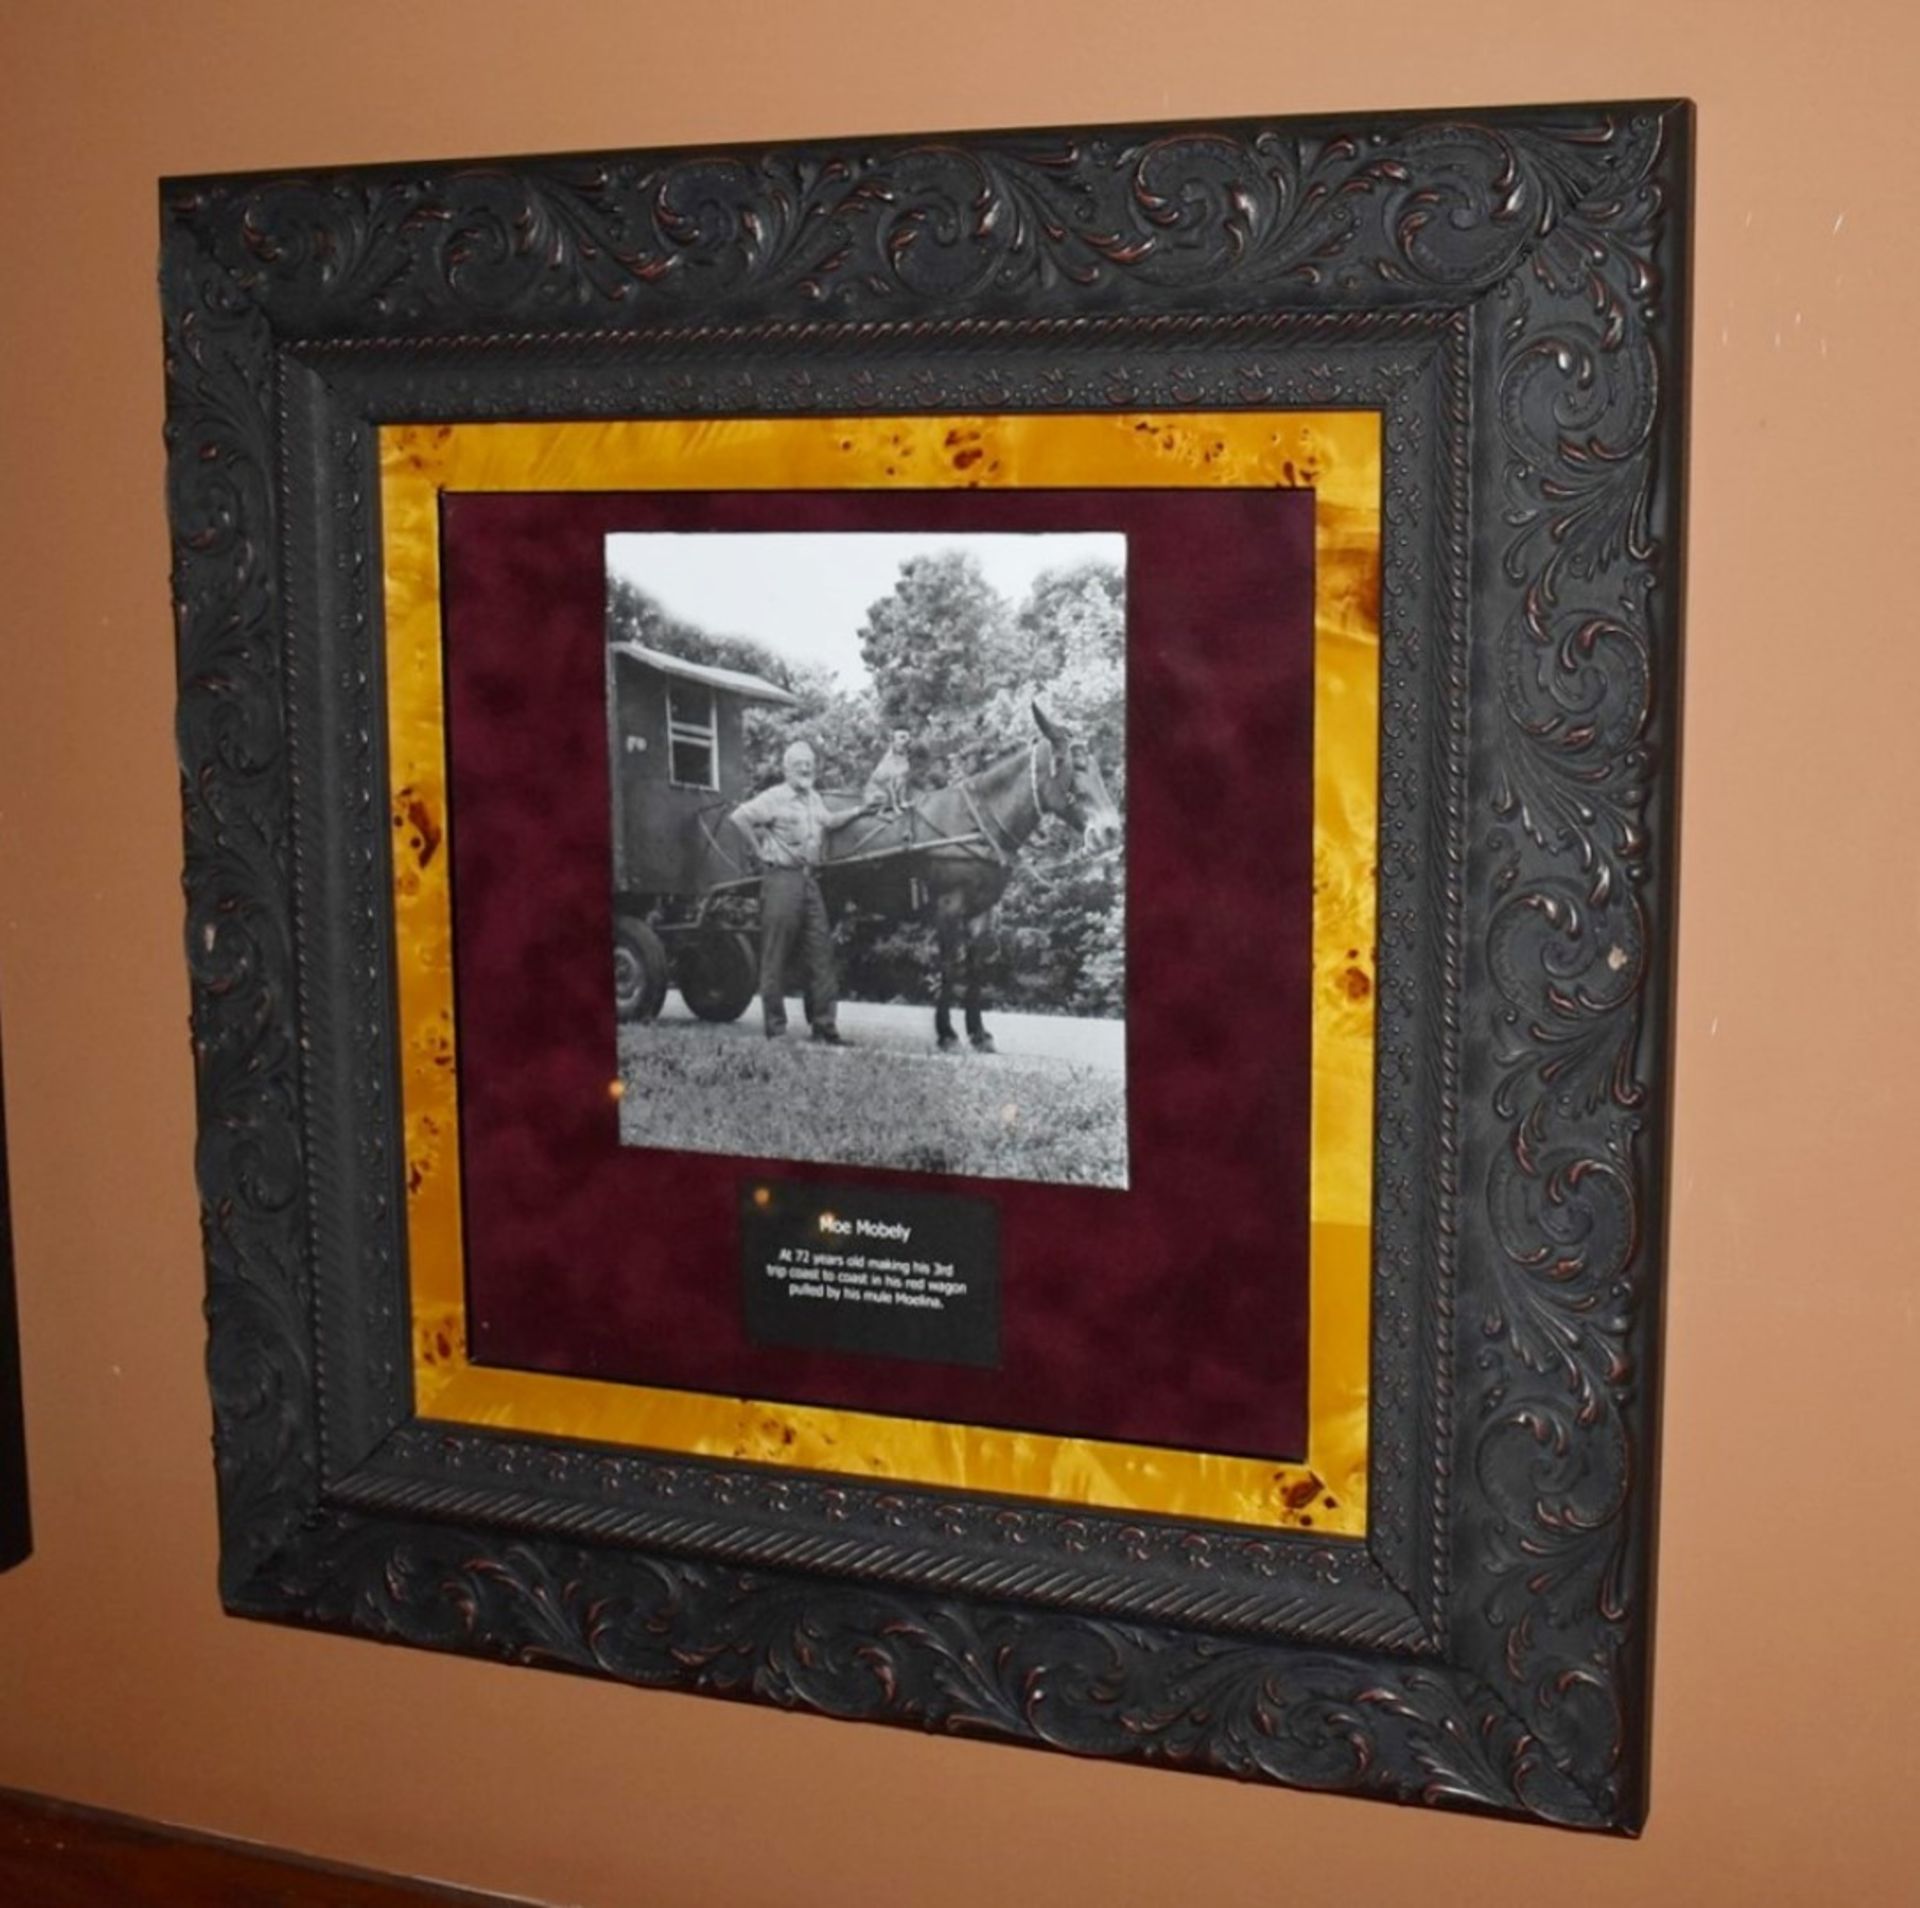 3 x Wall Pictures Depicting Historical American Adventurers in Ornate Frames - Size: 50 x 50 cms - Image 7 of 8